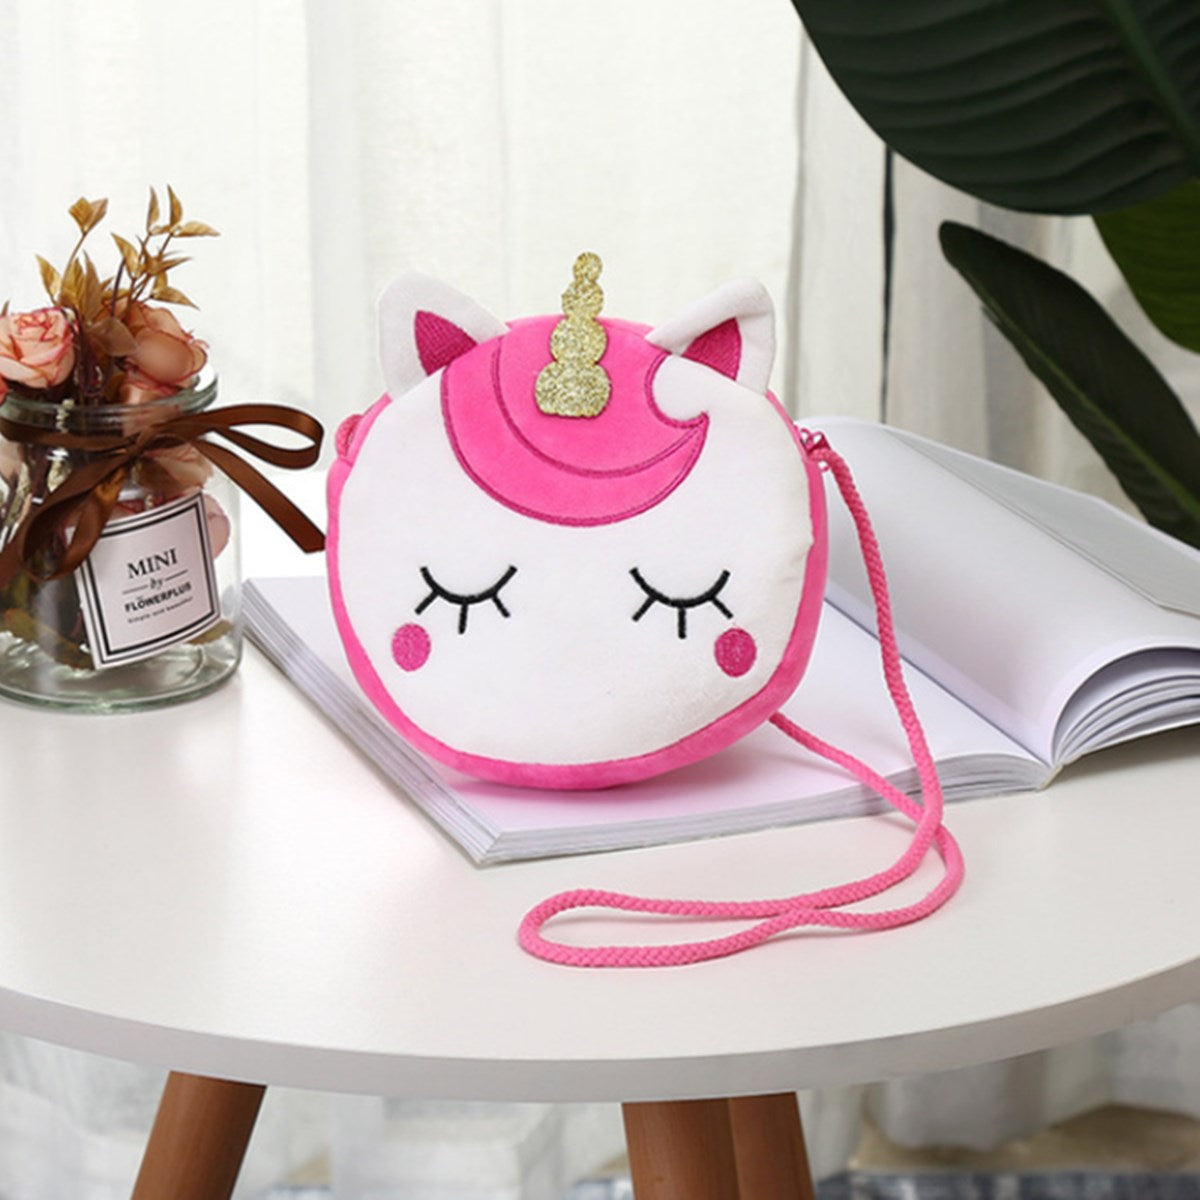 Buy Pinky Family Super Cute Girls Purse Bunny Ear Shoulder Bag Messenger Bag  Girls Gifts (Pattern 1 Blue) at Amazon.in